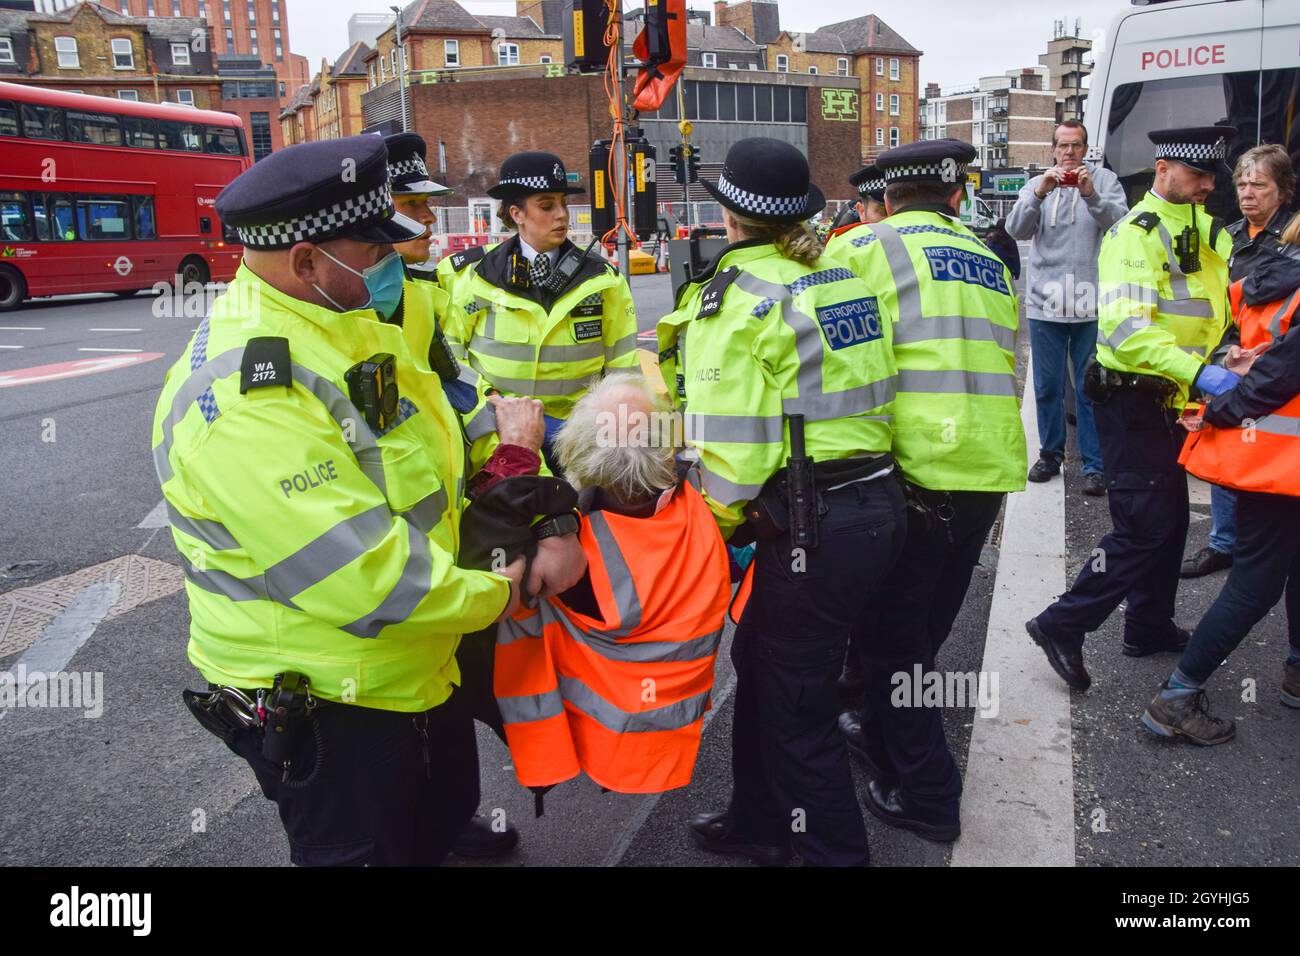 London, United Kingdom. 8th Oct, 2021. Police remove and arrest Insulate Britain protesters who glued themselves to the road at the Old Street roundabout. Insulate Britain protesters are demanding that the government insulates all social housing by 2025, and takes responsibility for ensuring that all homes in the UK are more energy-efficient by 2030, as part of wider climate change and decarbonization targets. Credit: Vuk Valcic/Alamy Live News Stock Photo